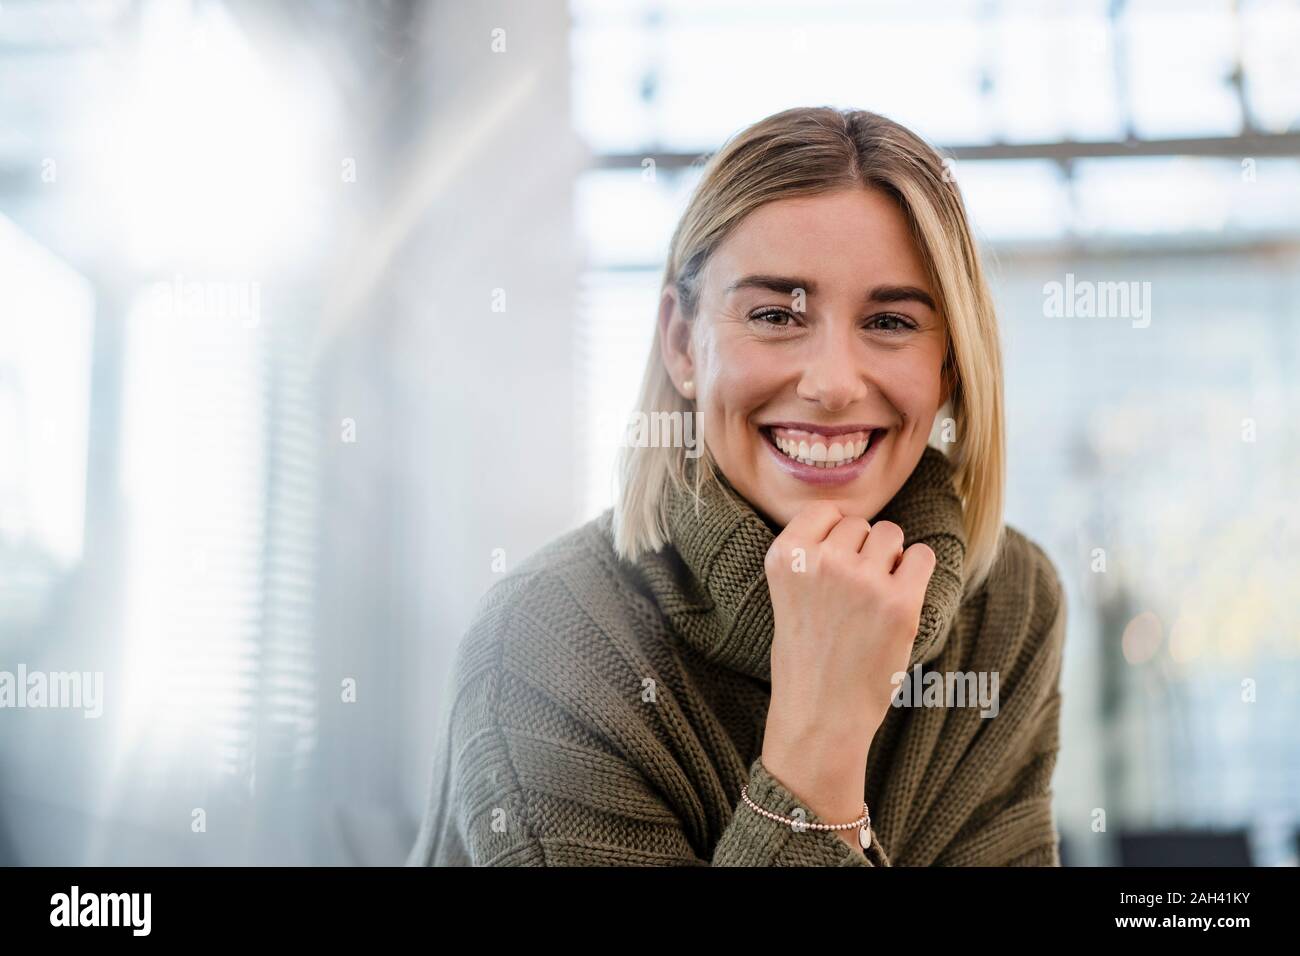 Portrait of a happy young woman Stock Photo